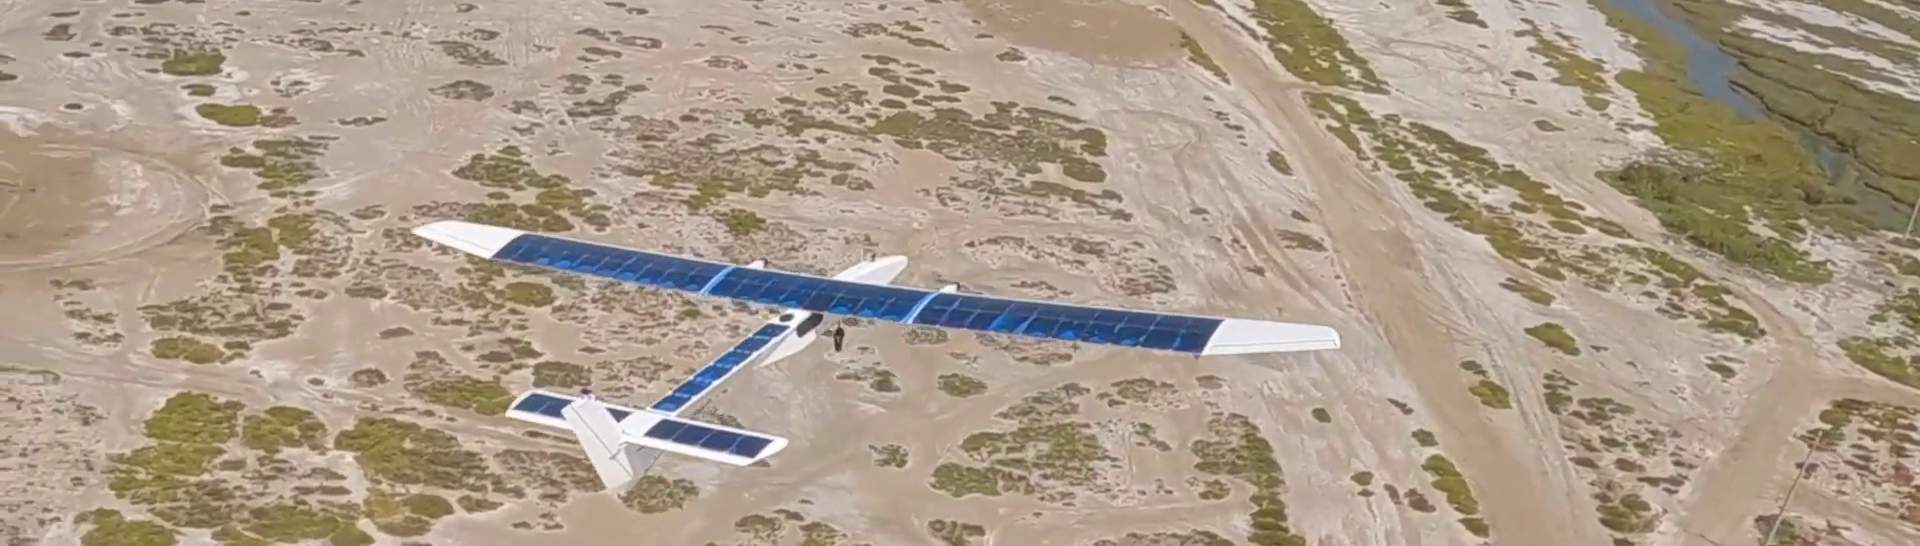 A solar plane could last all night